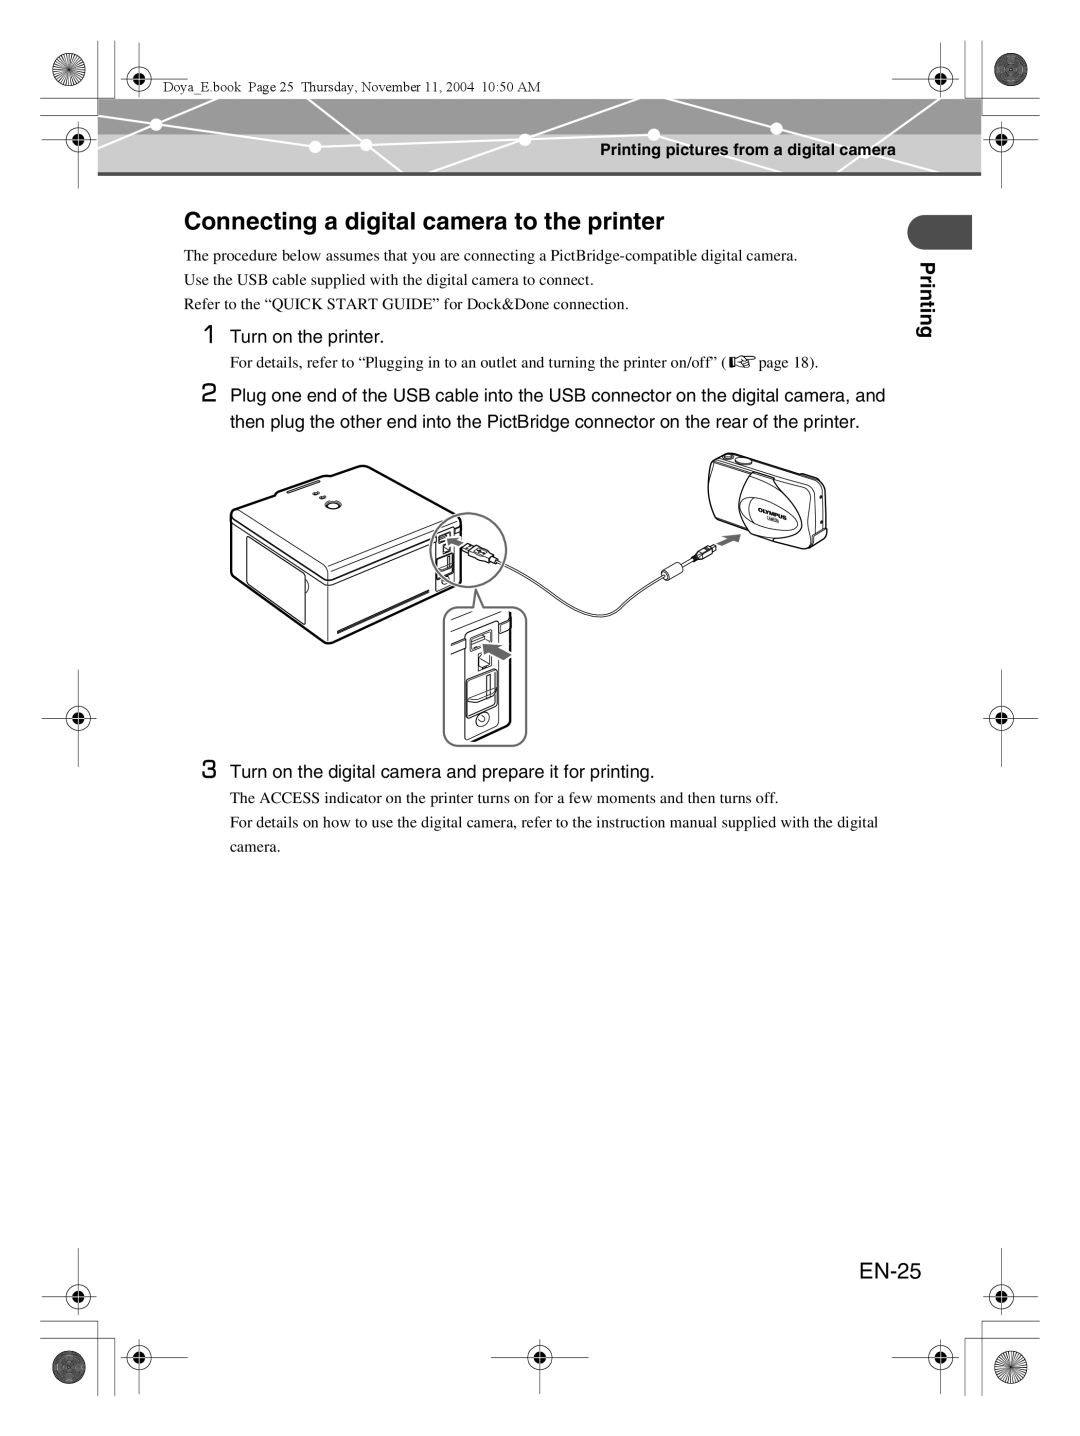 Olympus P-S100 user manual Connecting a digital camera to the printer, EN-25, Printing pictures from a digital camera 